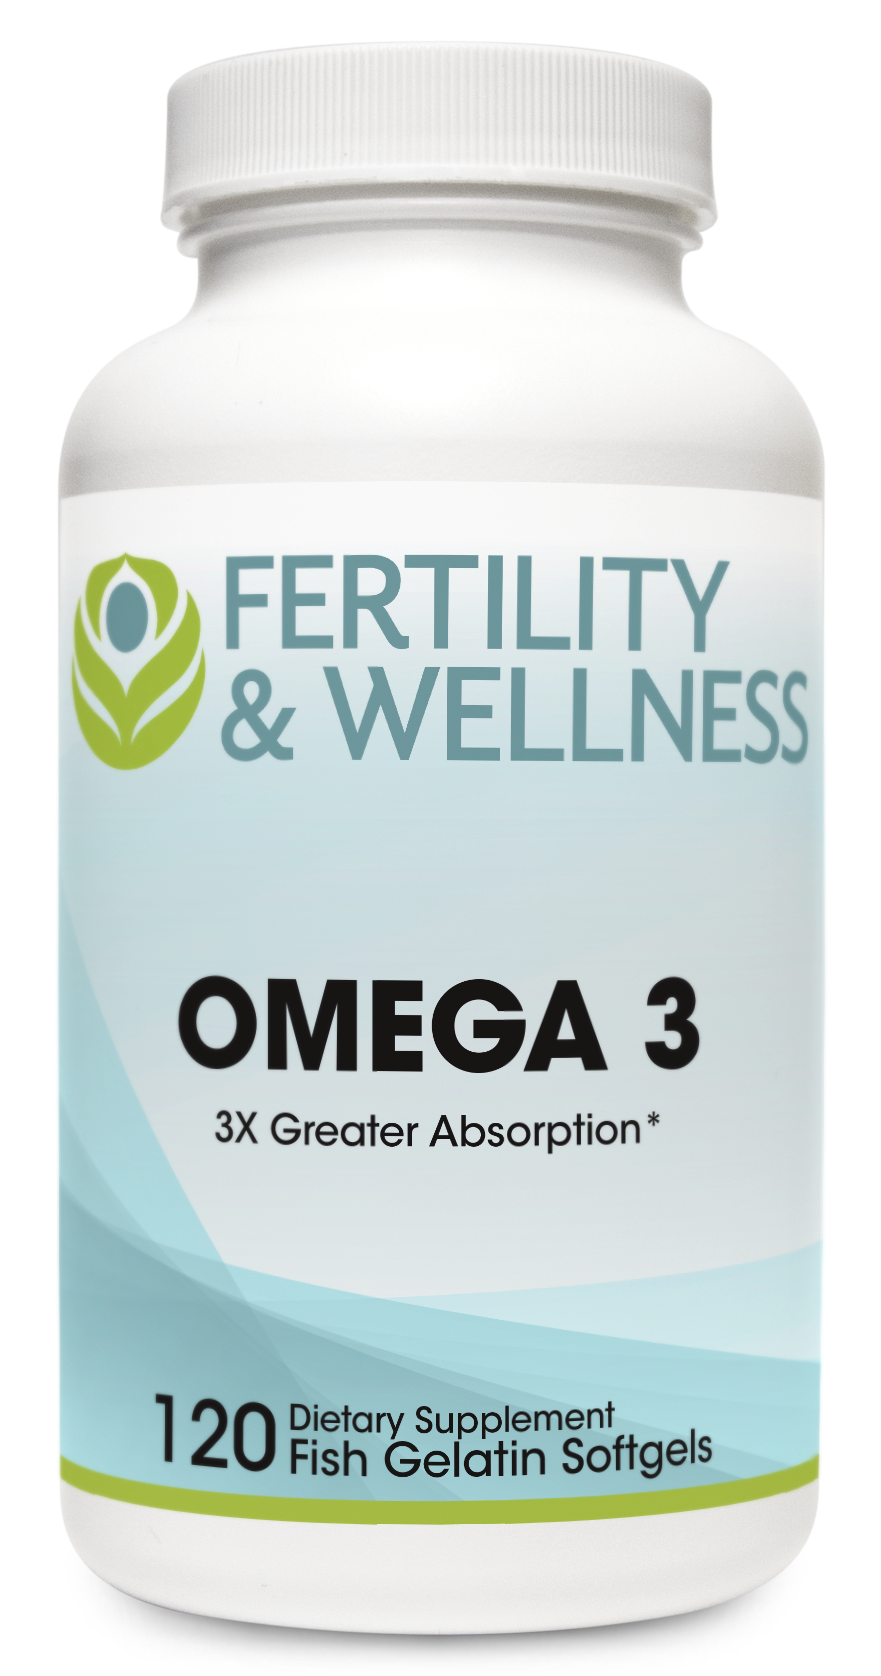 OMEGA 3 (120-day supply)